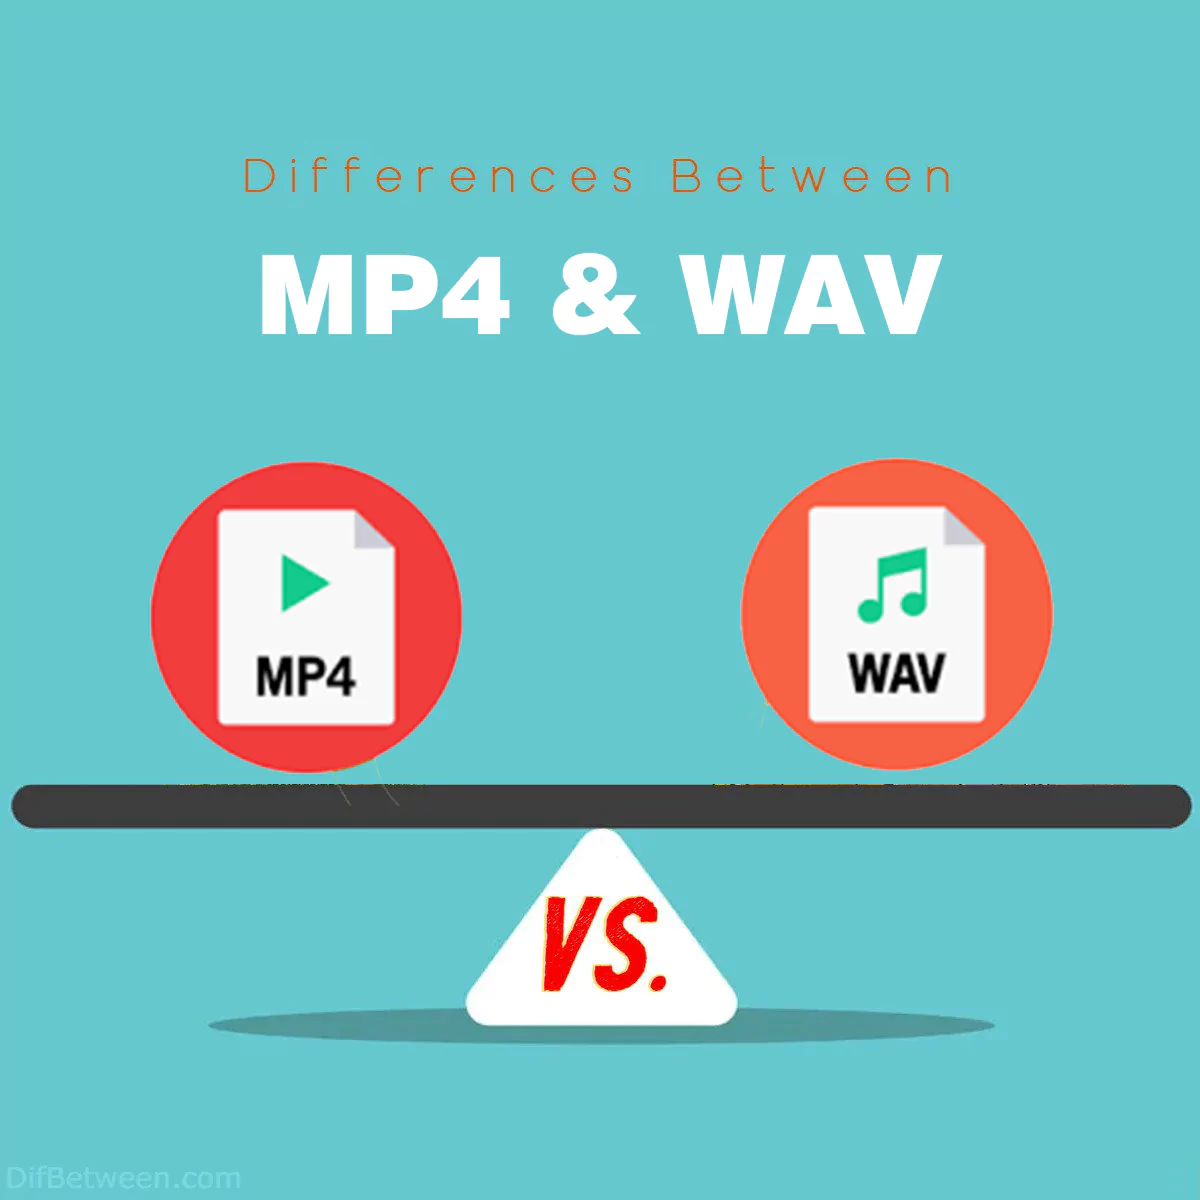 Differences Between MP4 and WAV